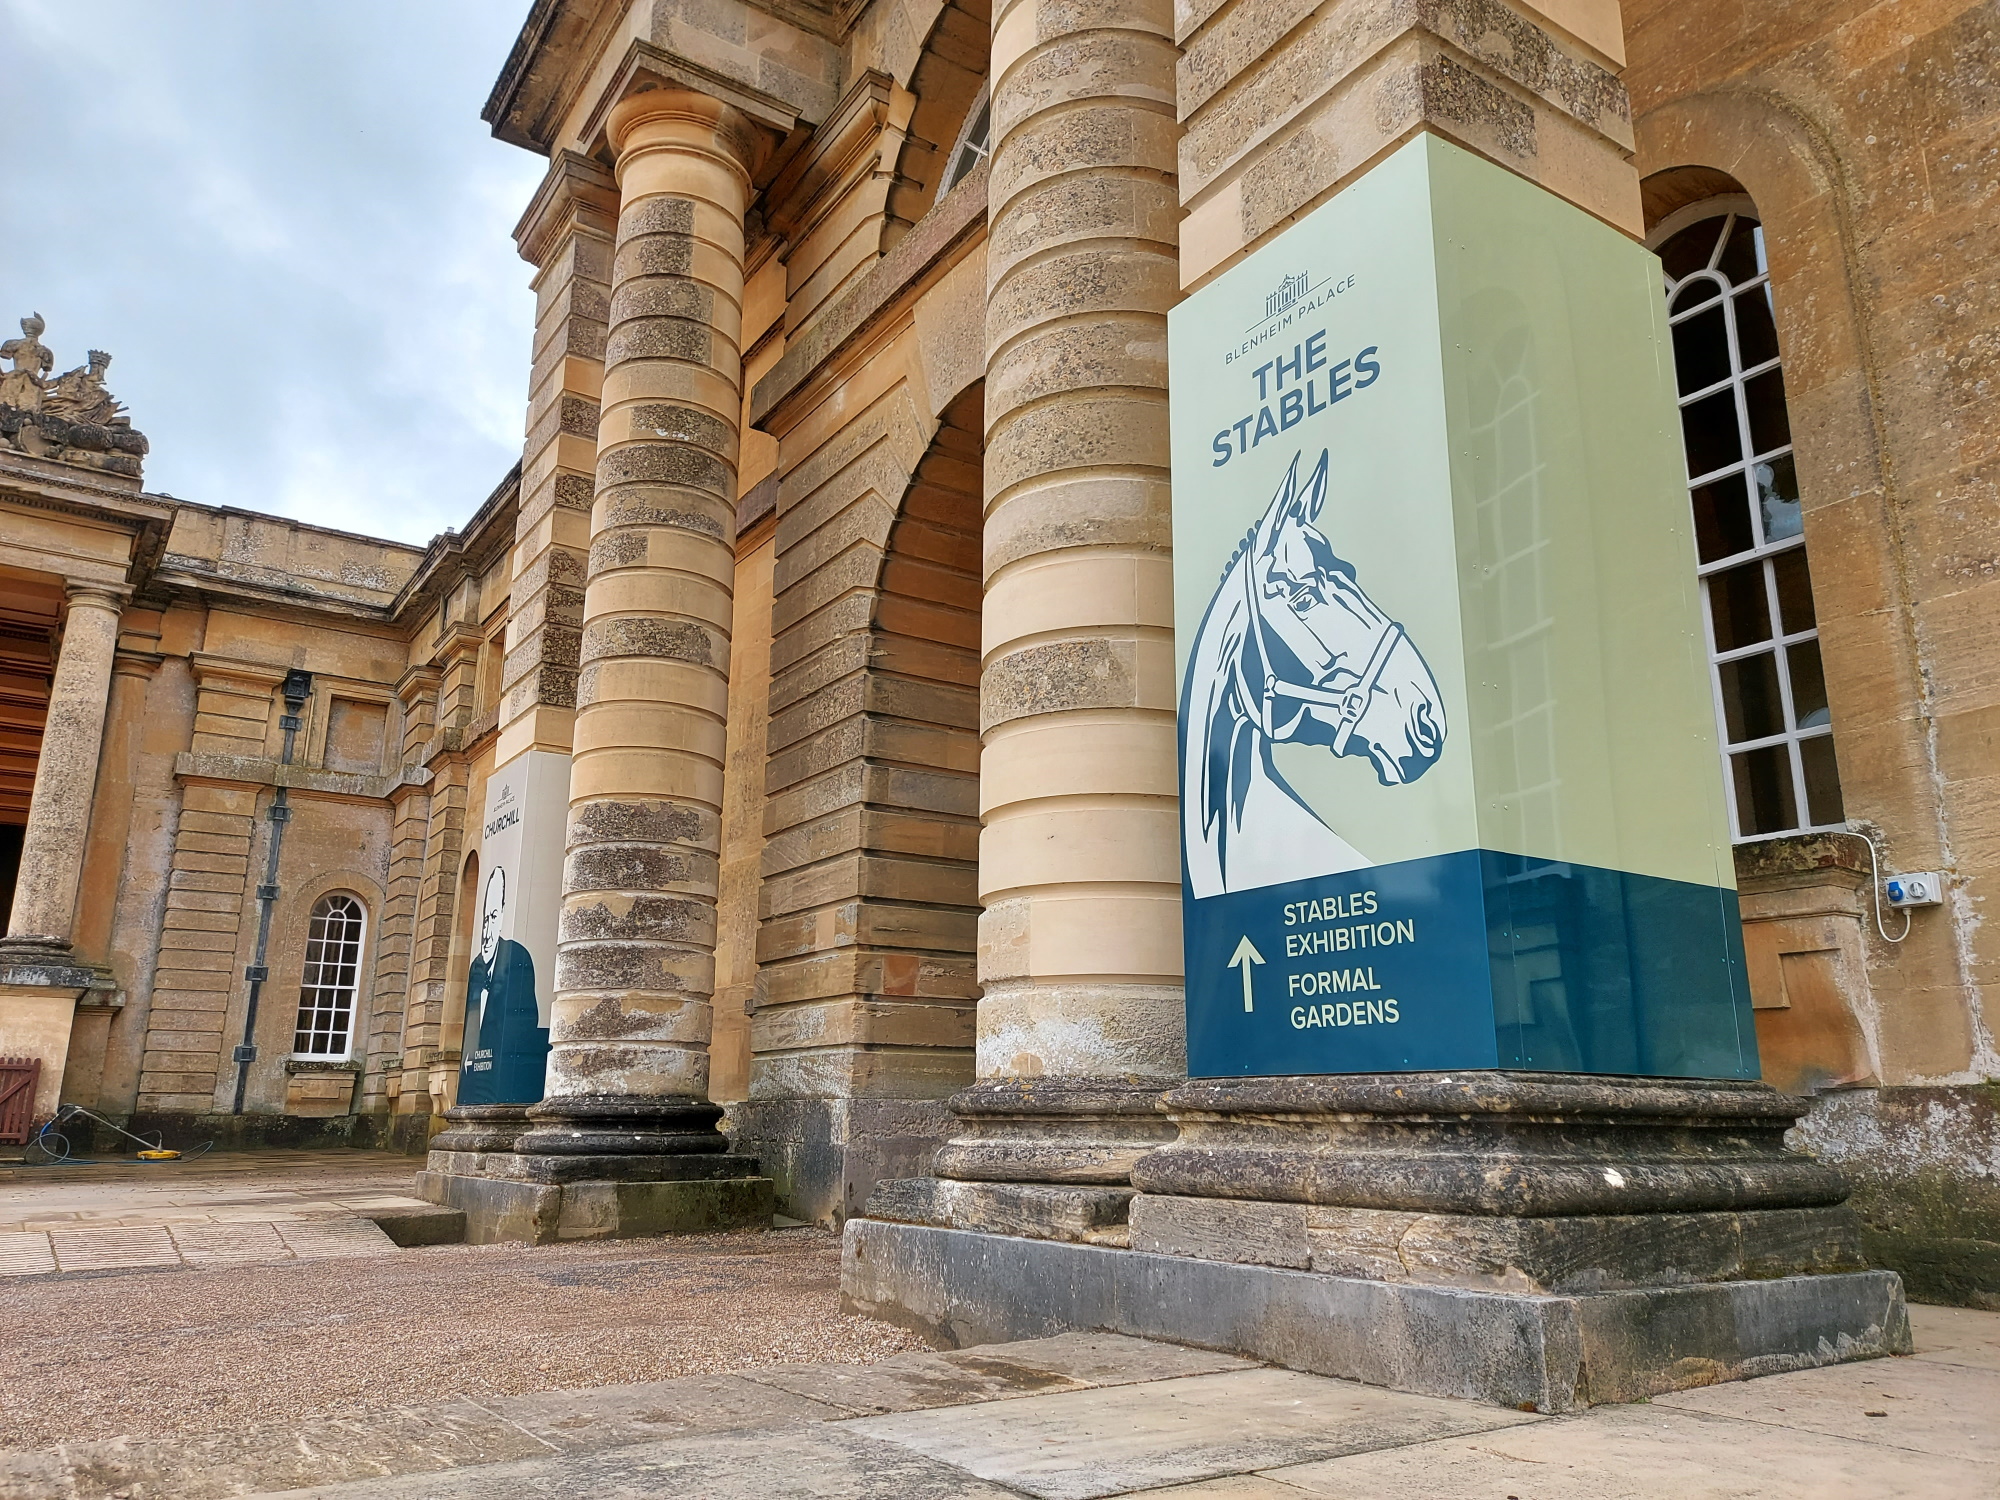 MacroArt has produced graphics for Blenheim Palace